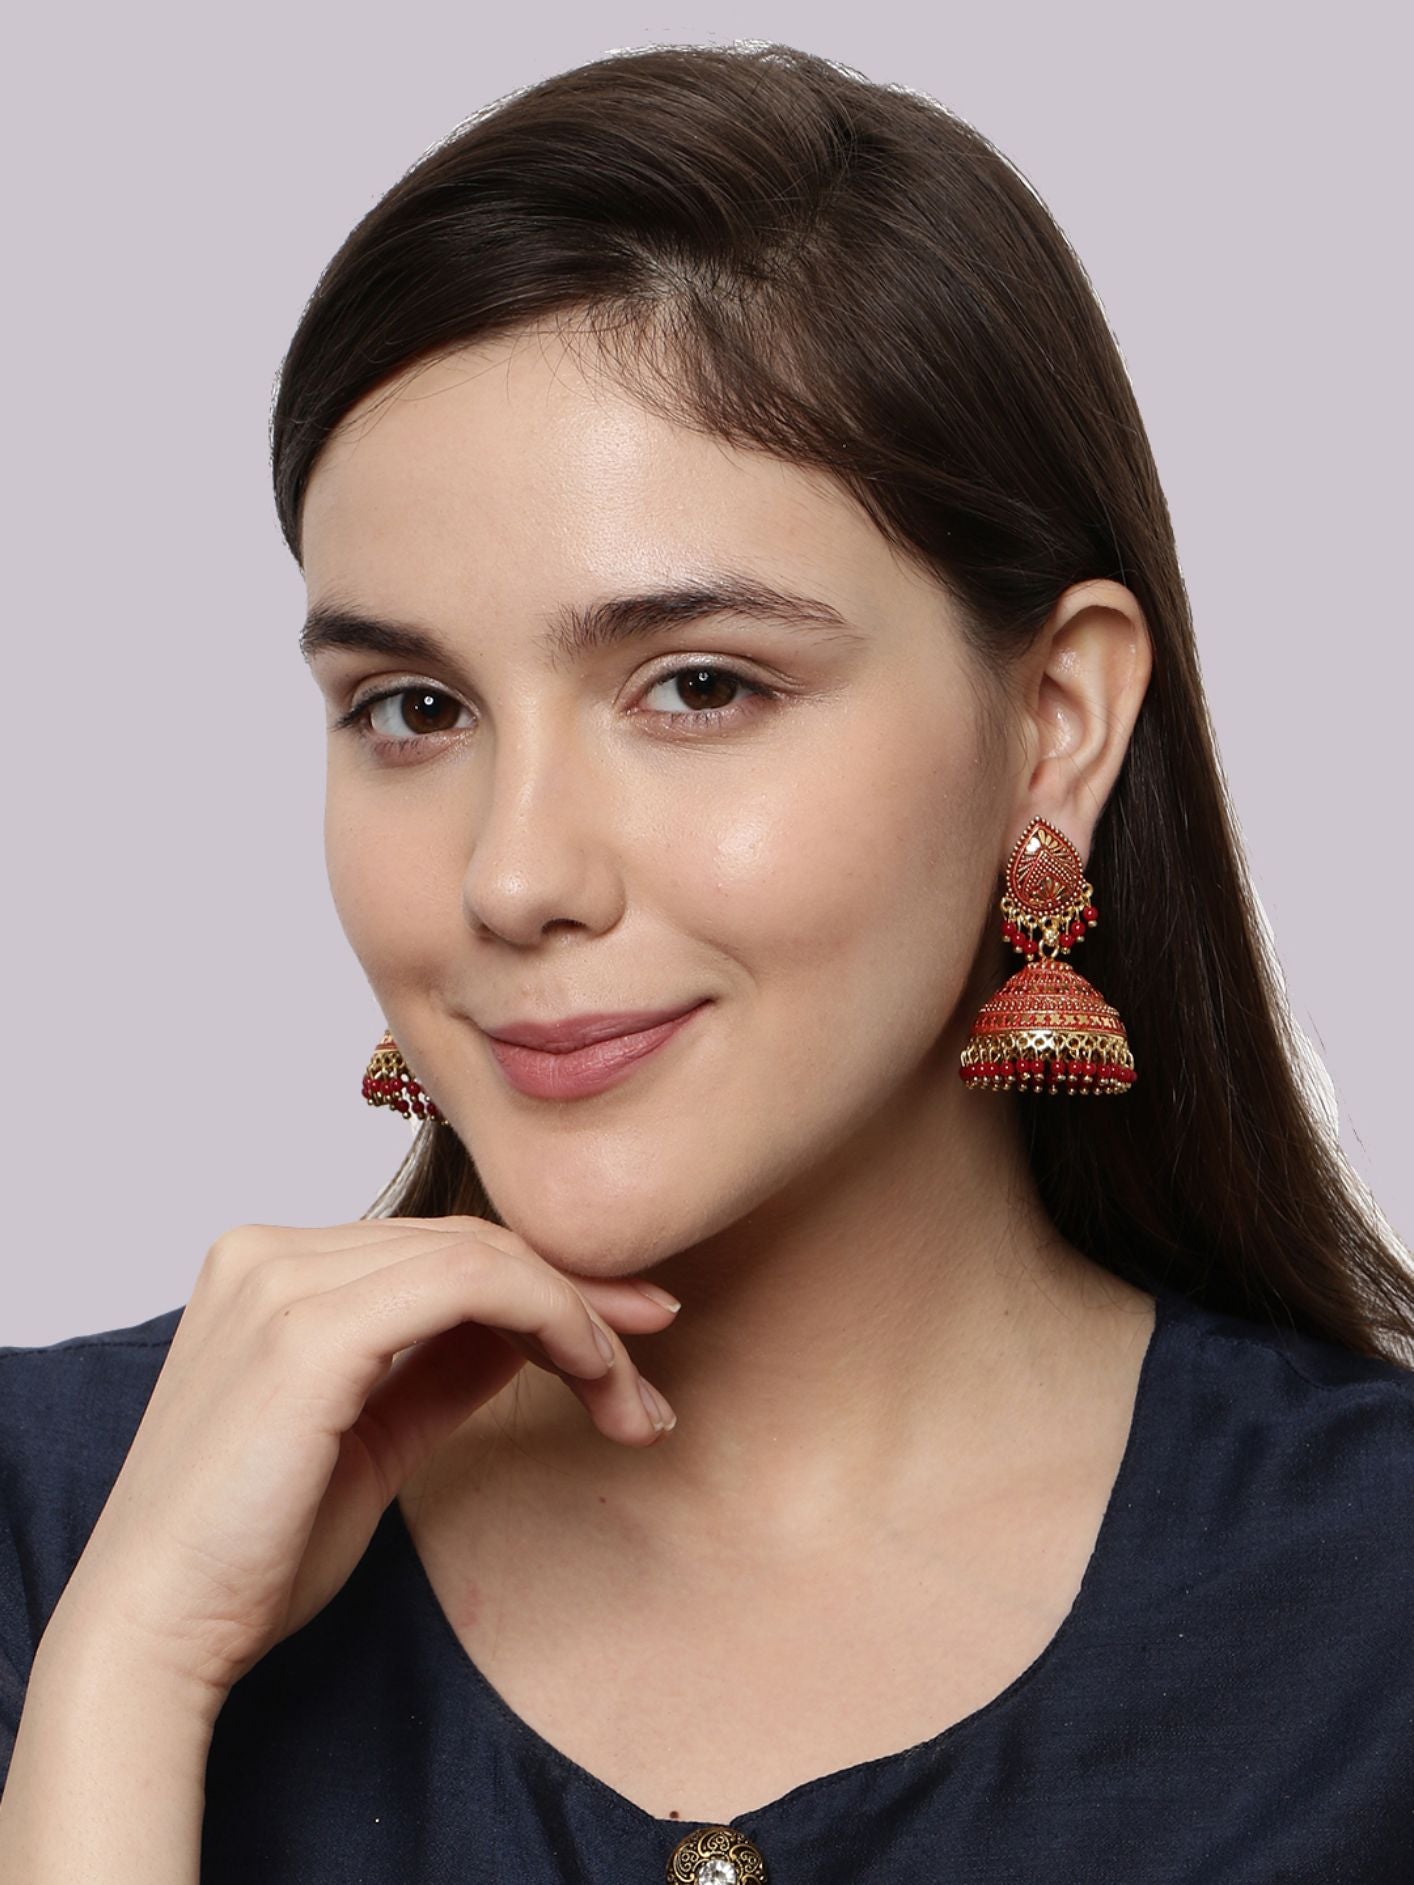 Women's Gold Plated & Red Dome Shaped Enamelled Jhumkas - Anikas Creation